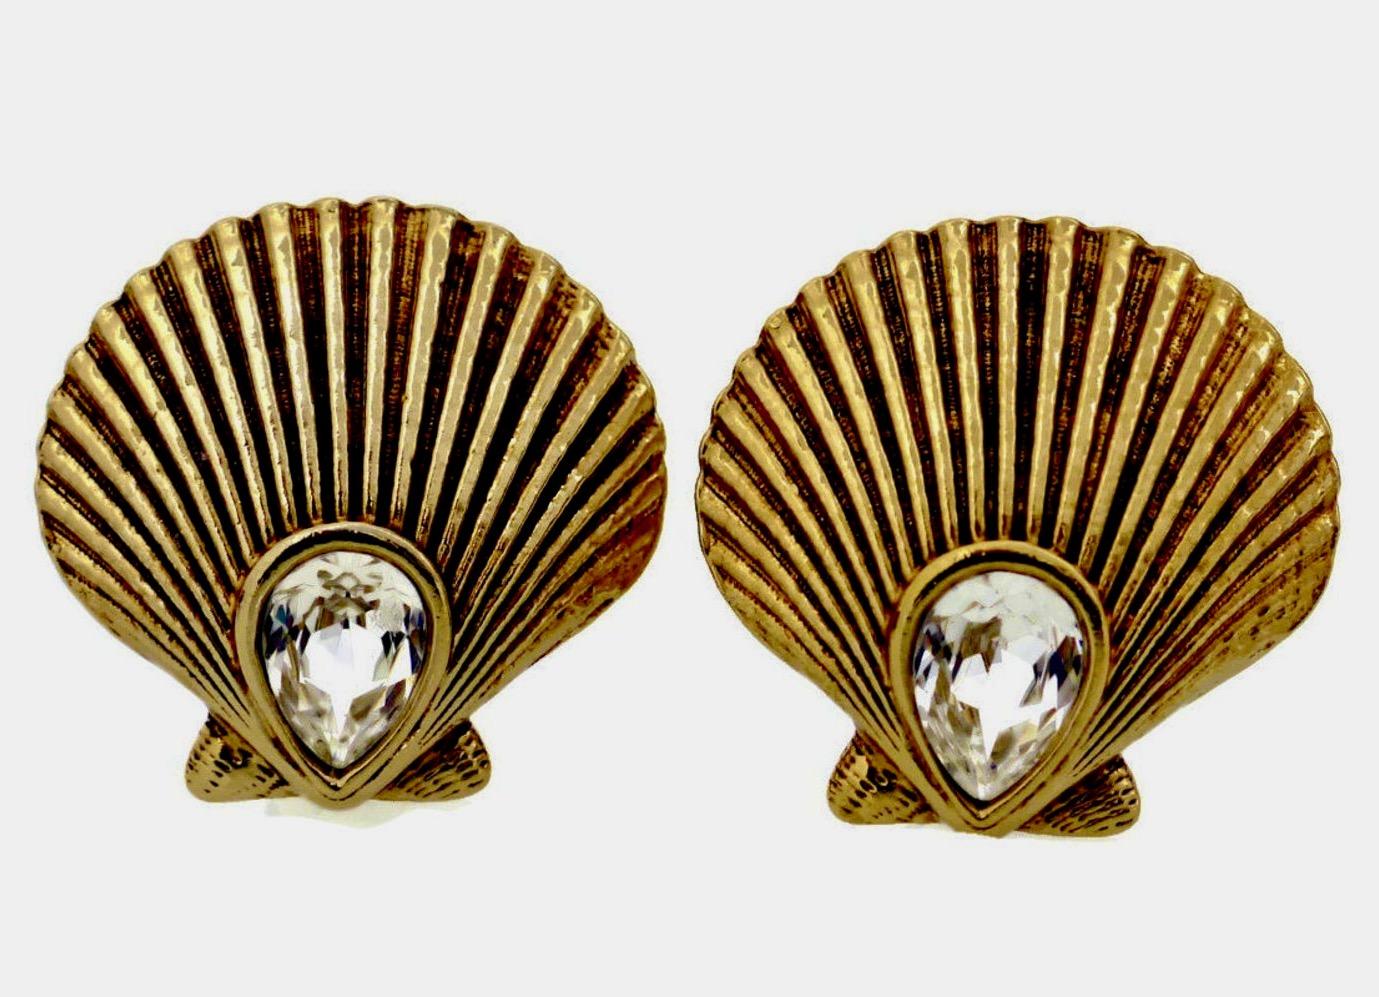 Vintage Yves Saint Laurent YSL Clam Shell Rhinestone Earrings

Measurements:
Height: 1 5/8 inches
Width: 1 5/8 inches

Features:
- 100% Authentic YVES SAINT LAURENT.
- Textured clam shell shape in gold tone.
- Embellished with sparkly faceted